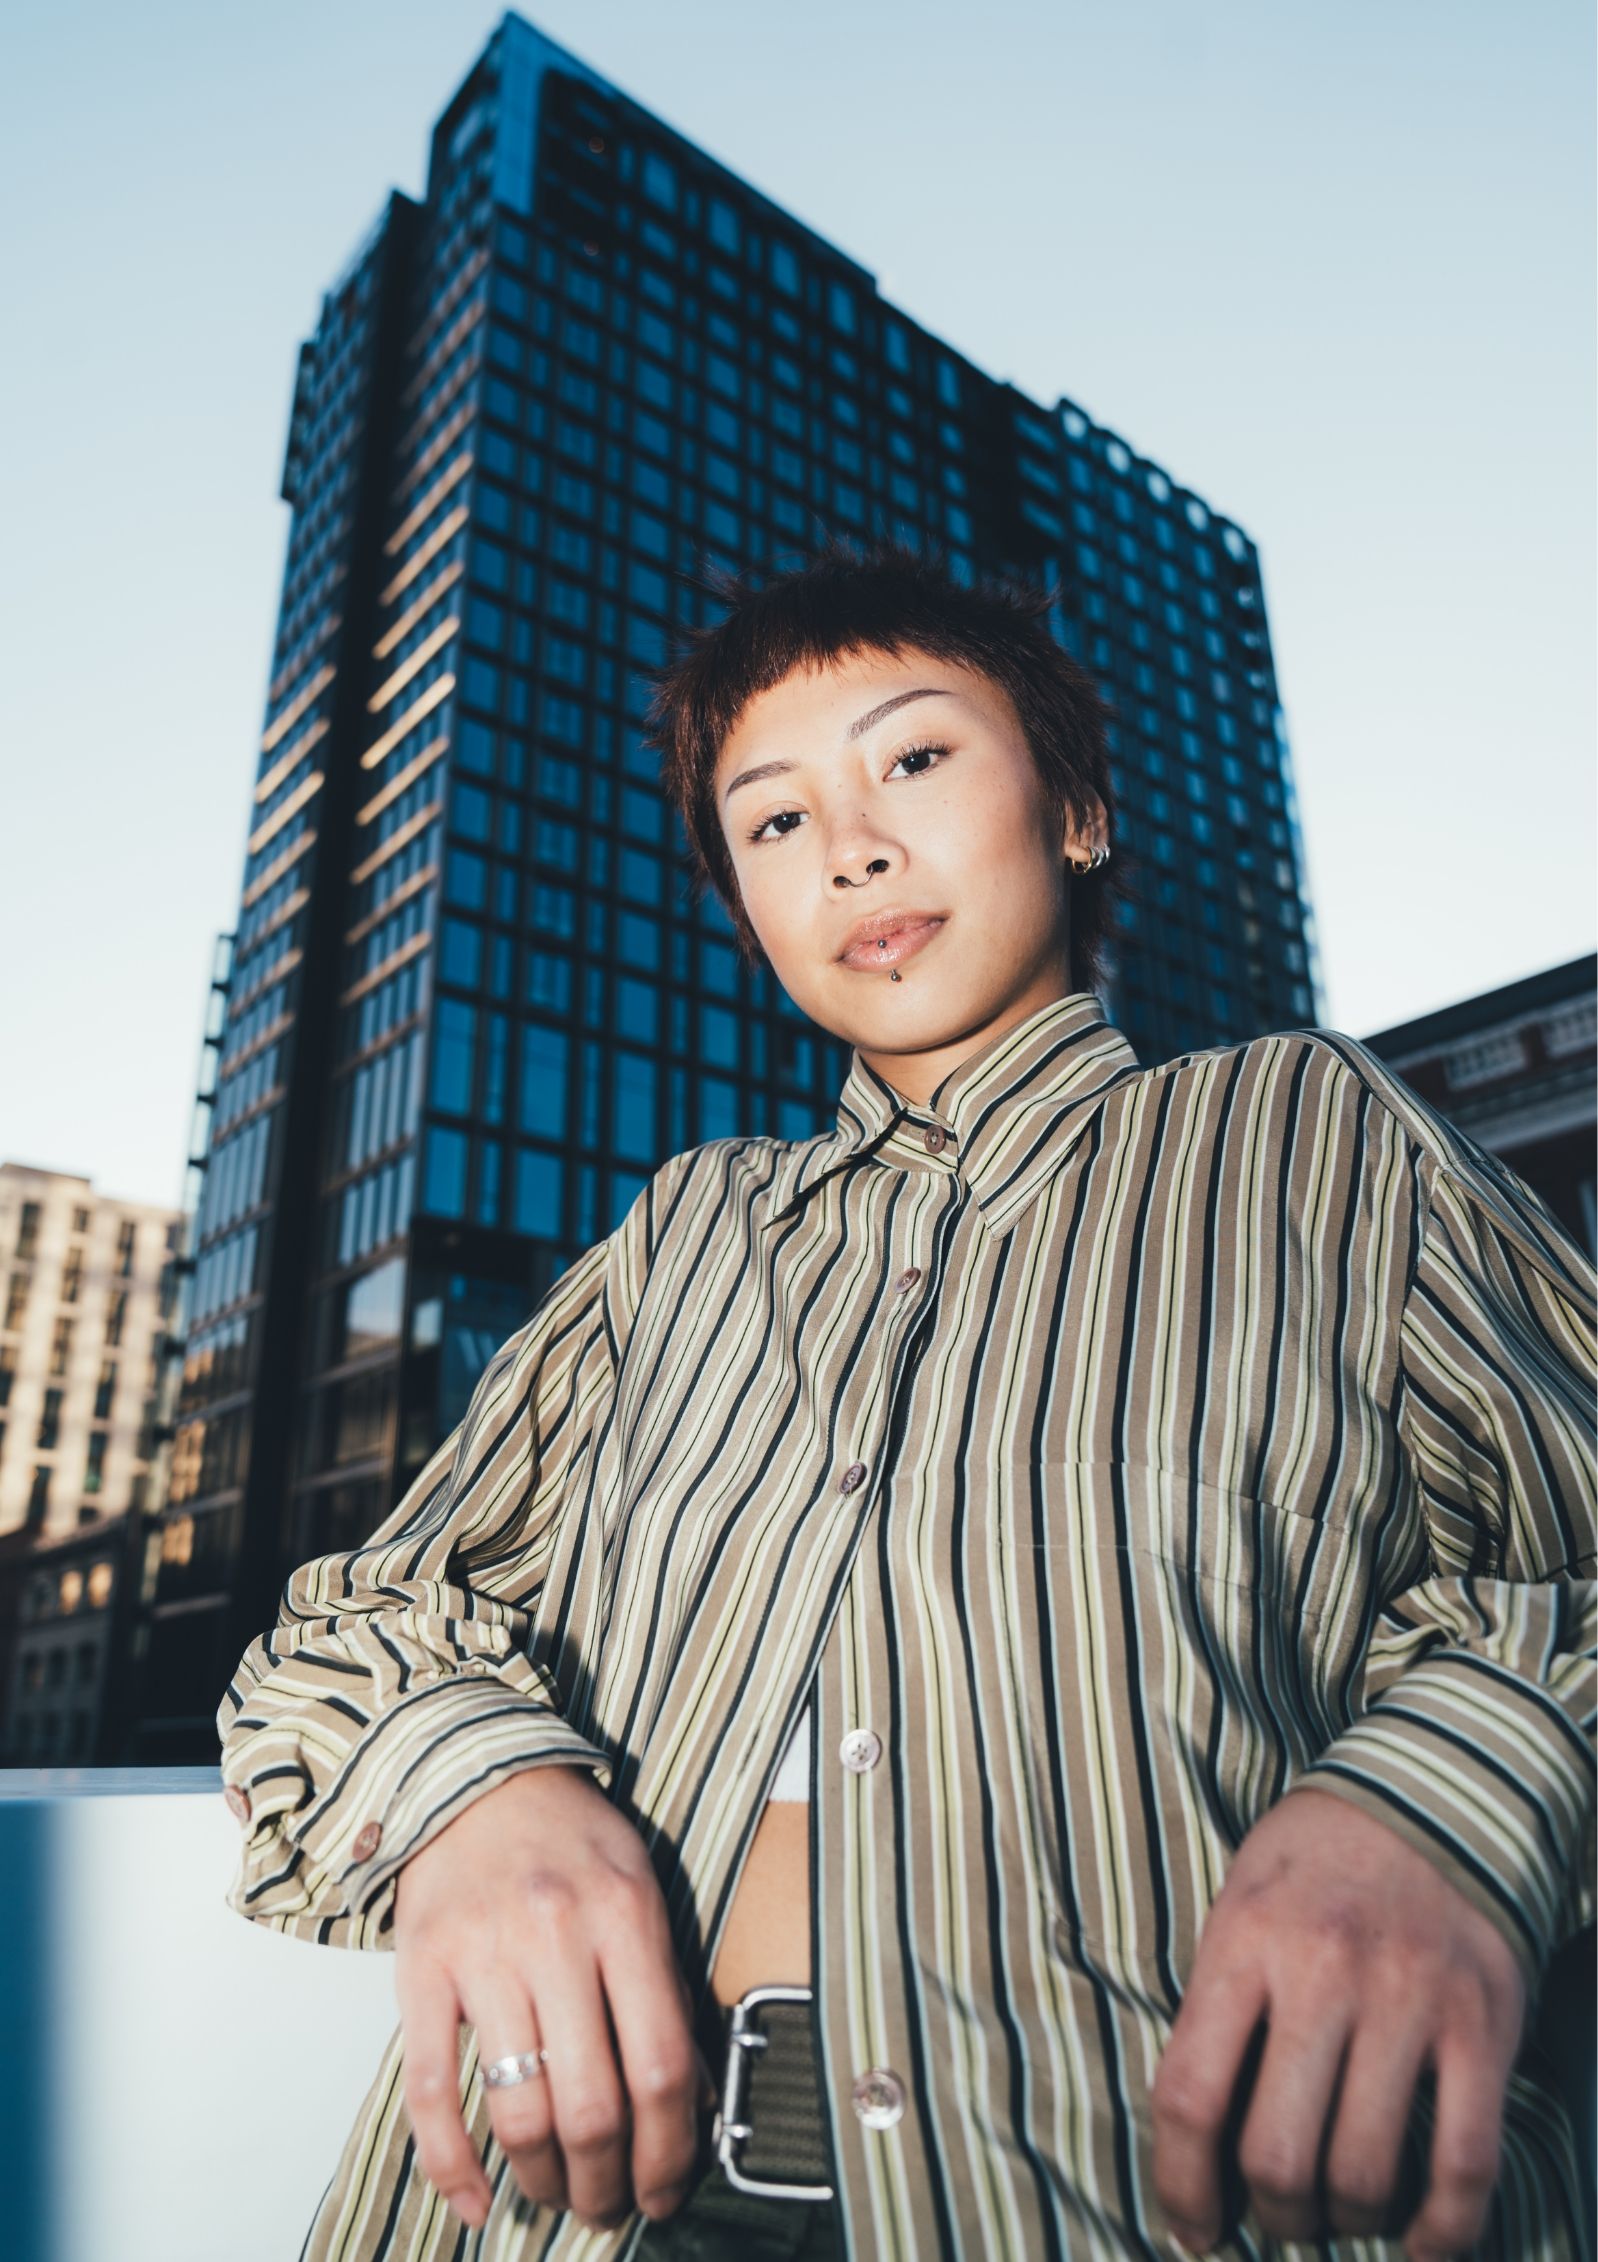 A woman in a striped shirt stands confidently with a high-rise building in the background under a clear sky.